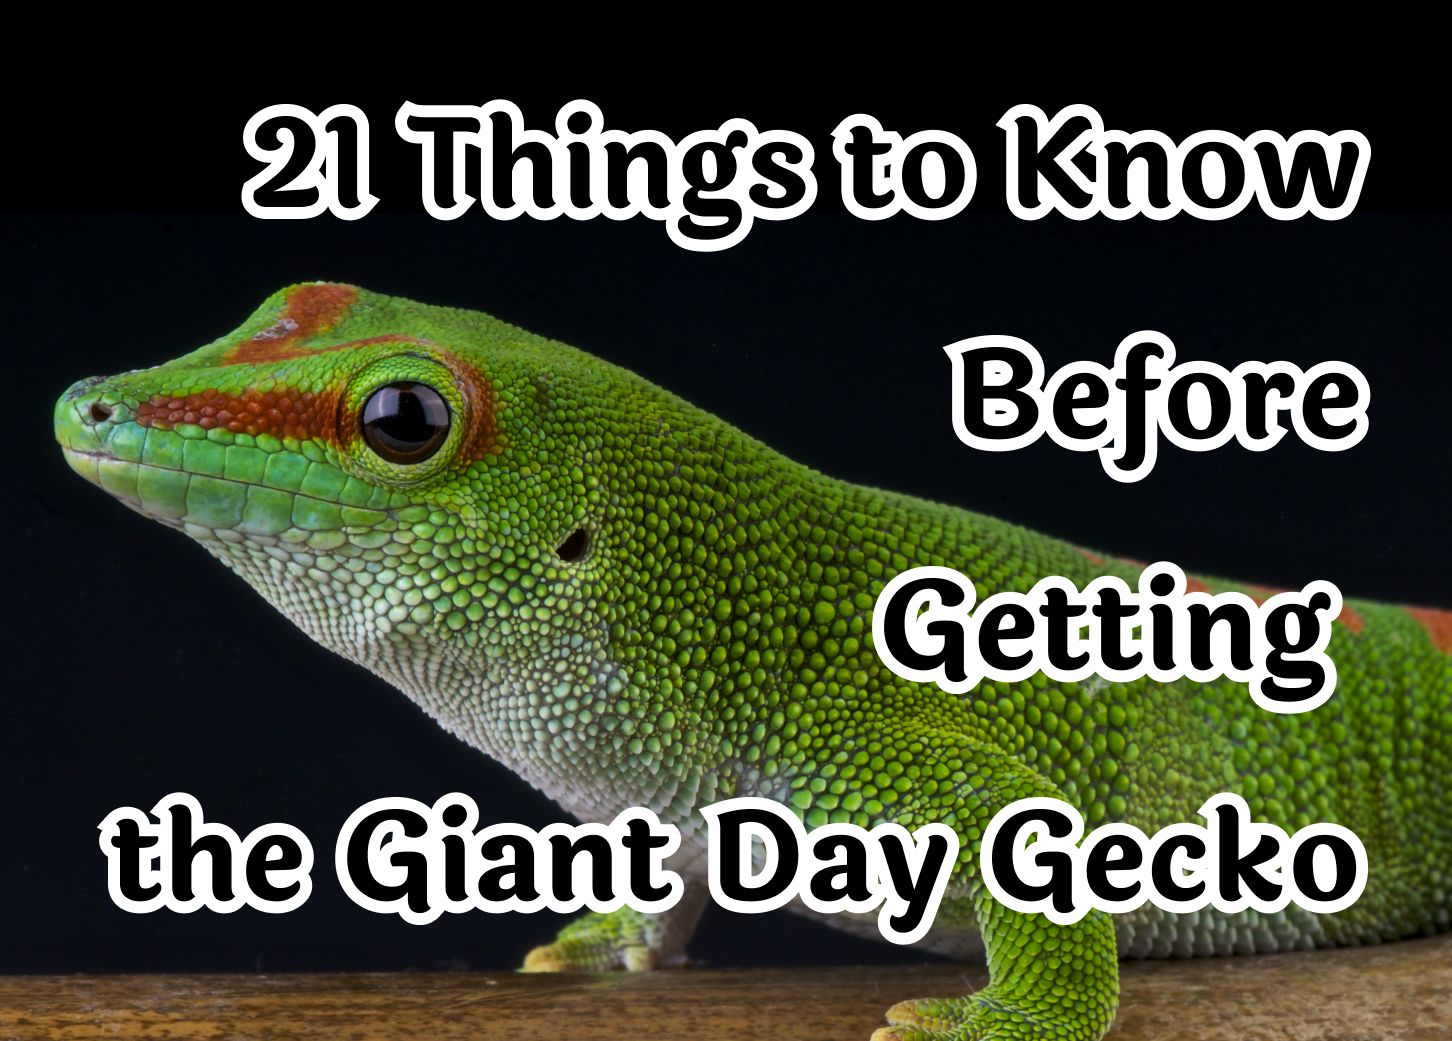 21 Things to Know Before Getting the Giant Day Gecko